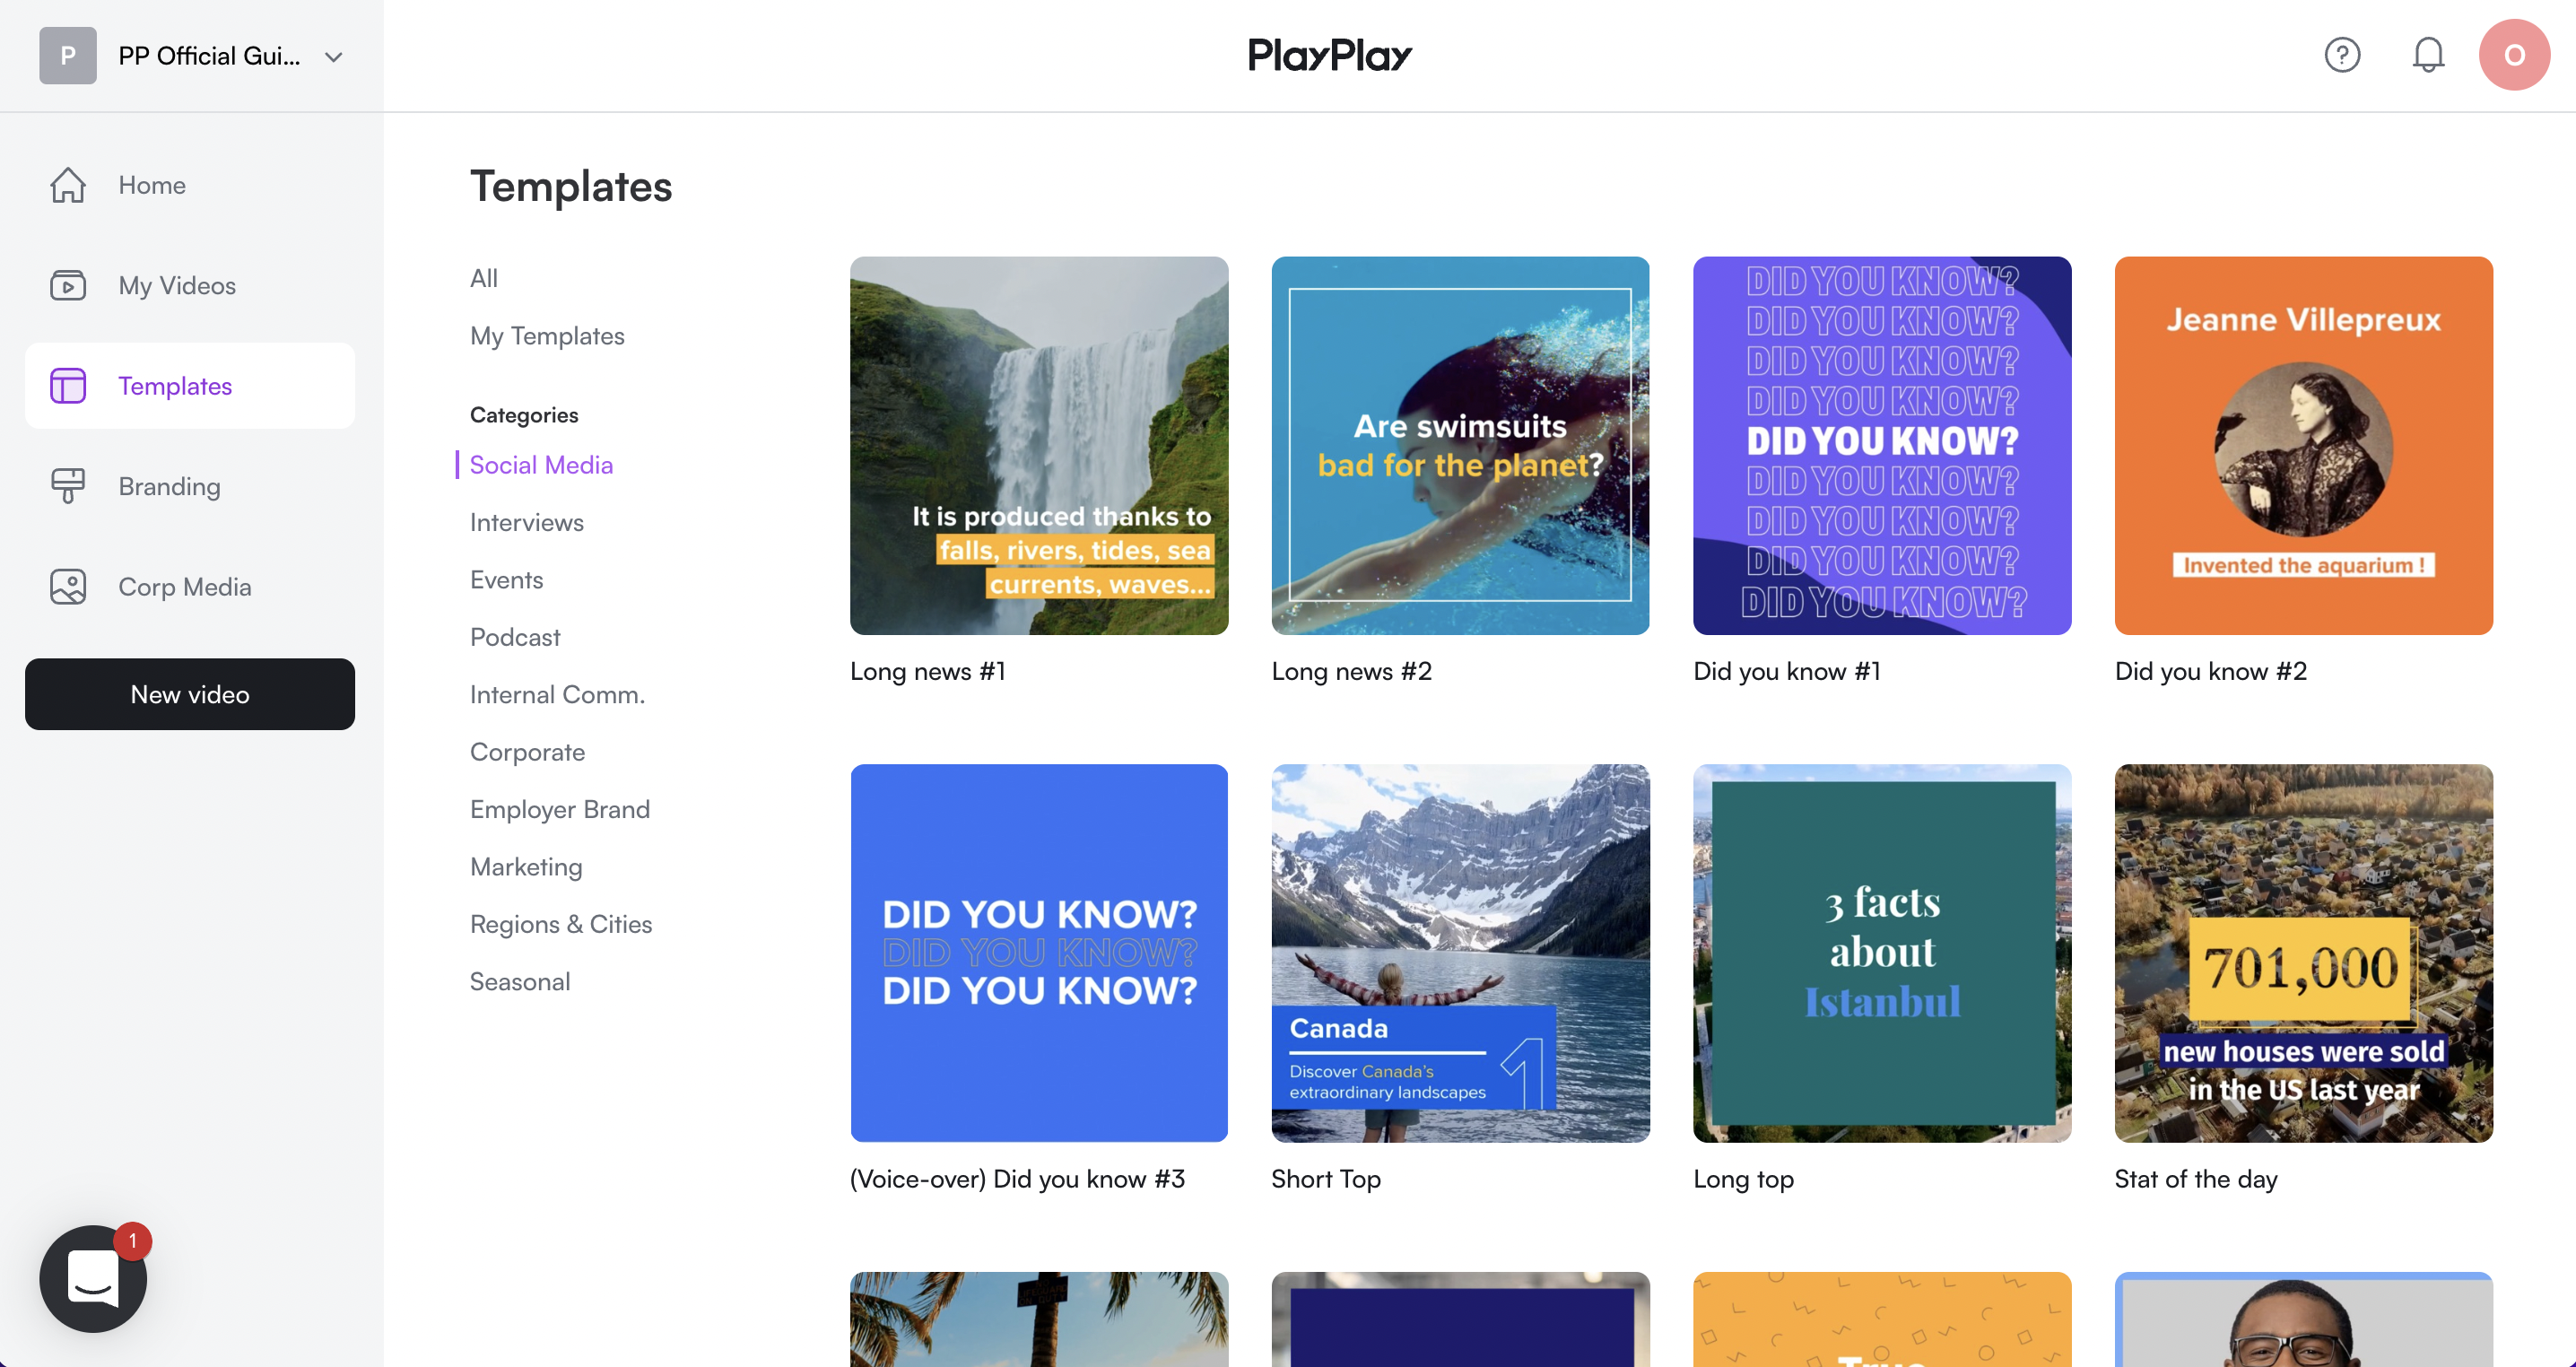 PlayPlay Software - Rich library of ready-made screens and video templates - designed exactly for marketing and communication experts like yourself.